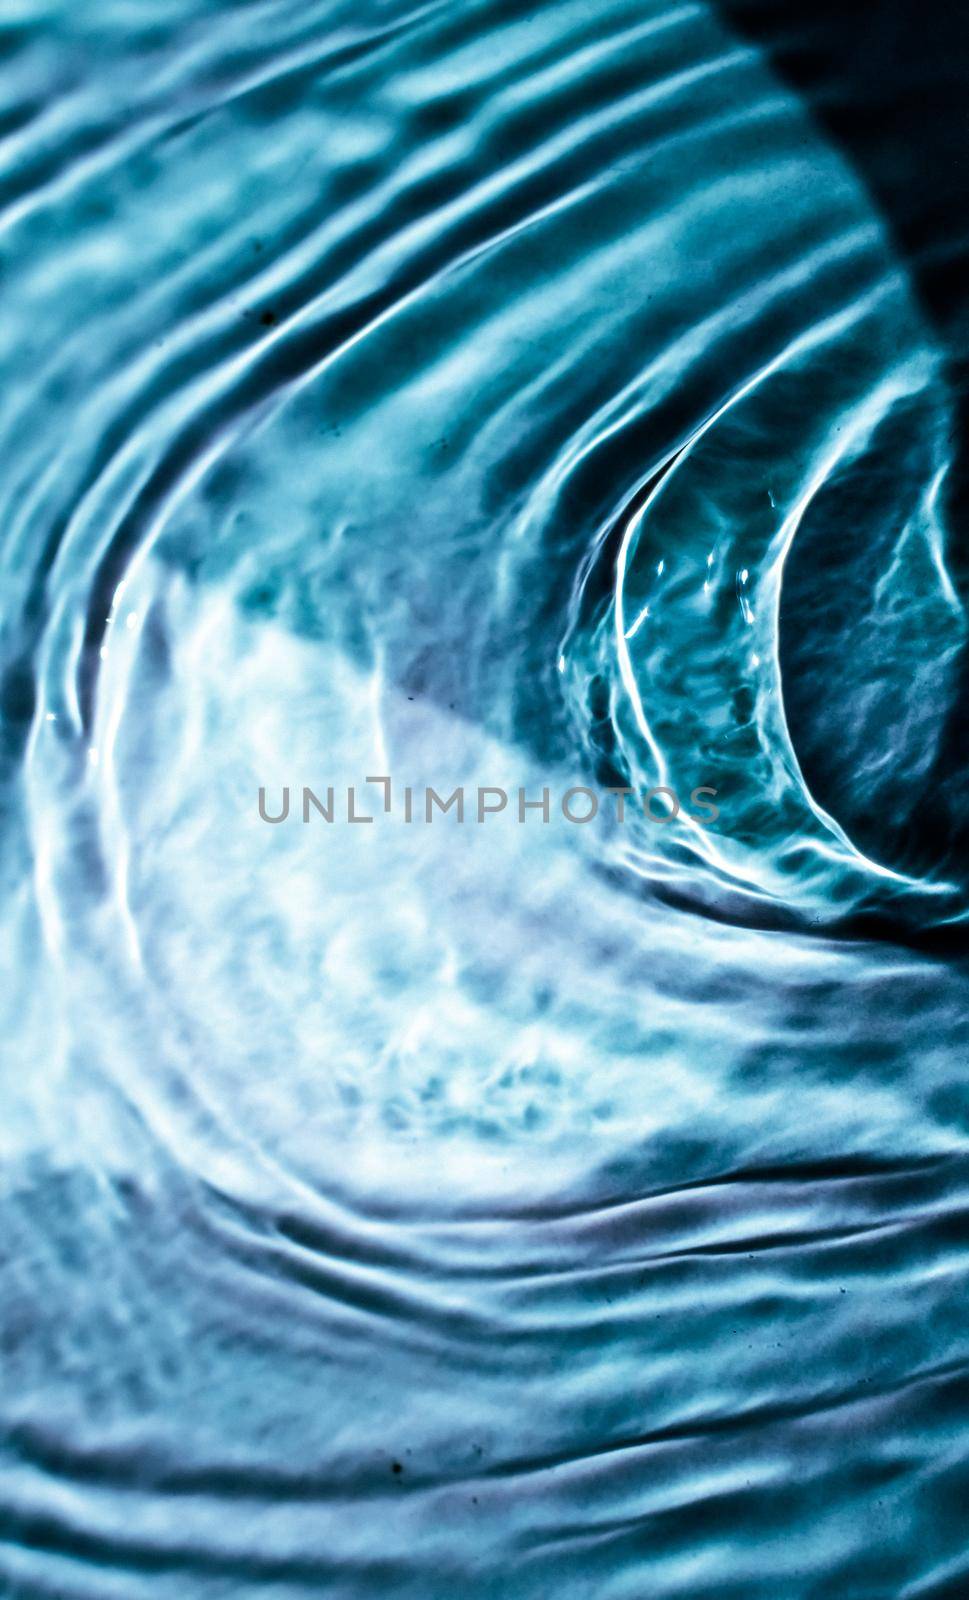 blue ripples, water abstract background - textures and natural elements styled concept